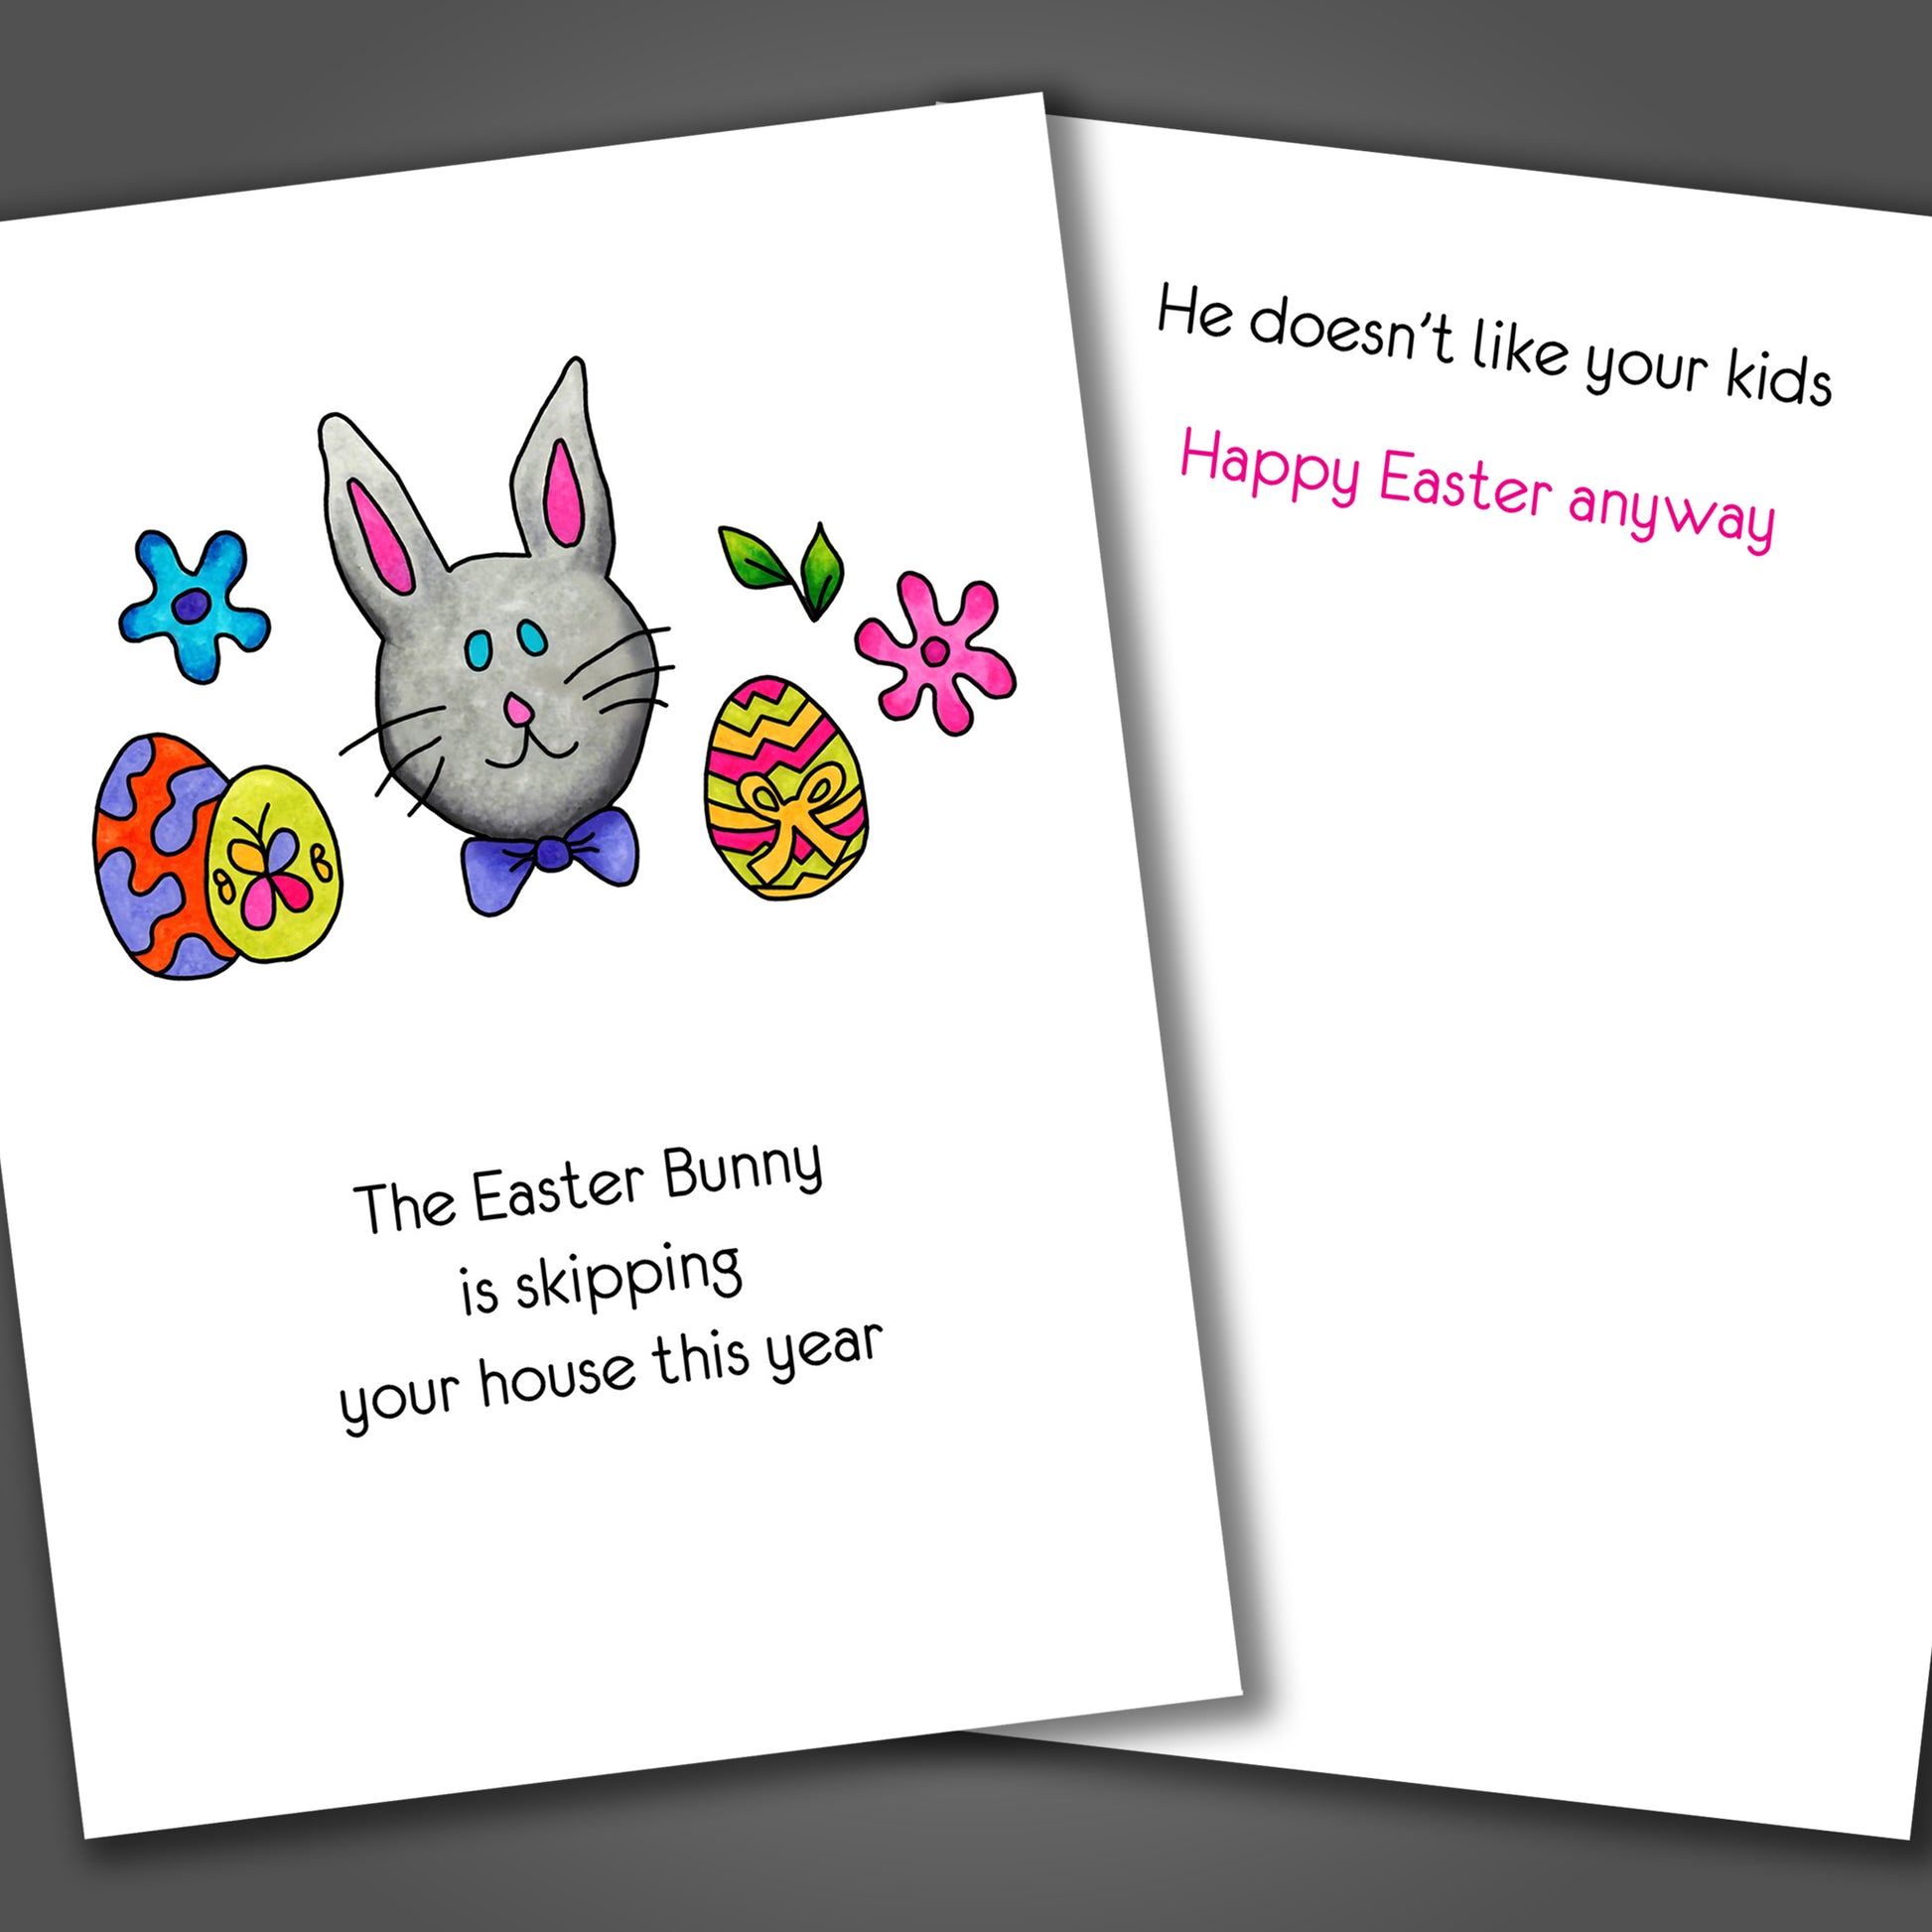 Happy Easter card with a bunny and eggs drawn on the front of the card. Inside the card is a funny joke that says the Easter Bunny doesn't like your kids.